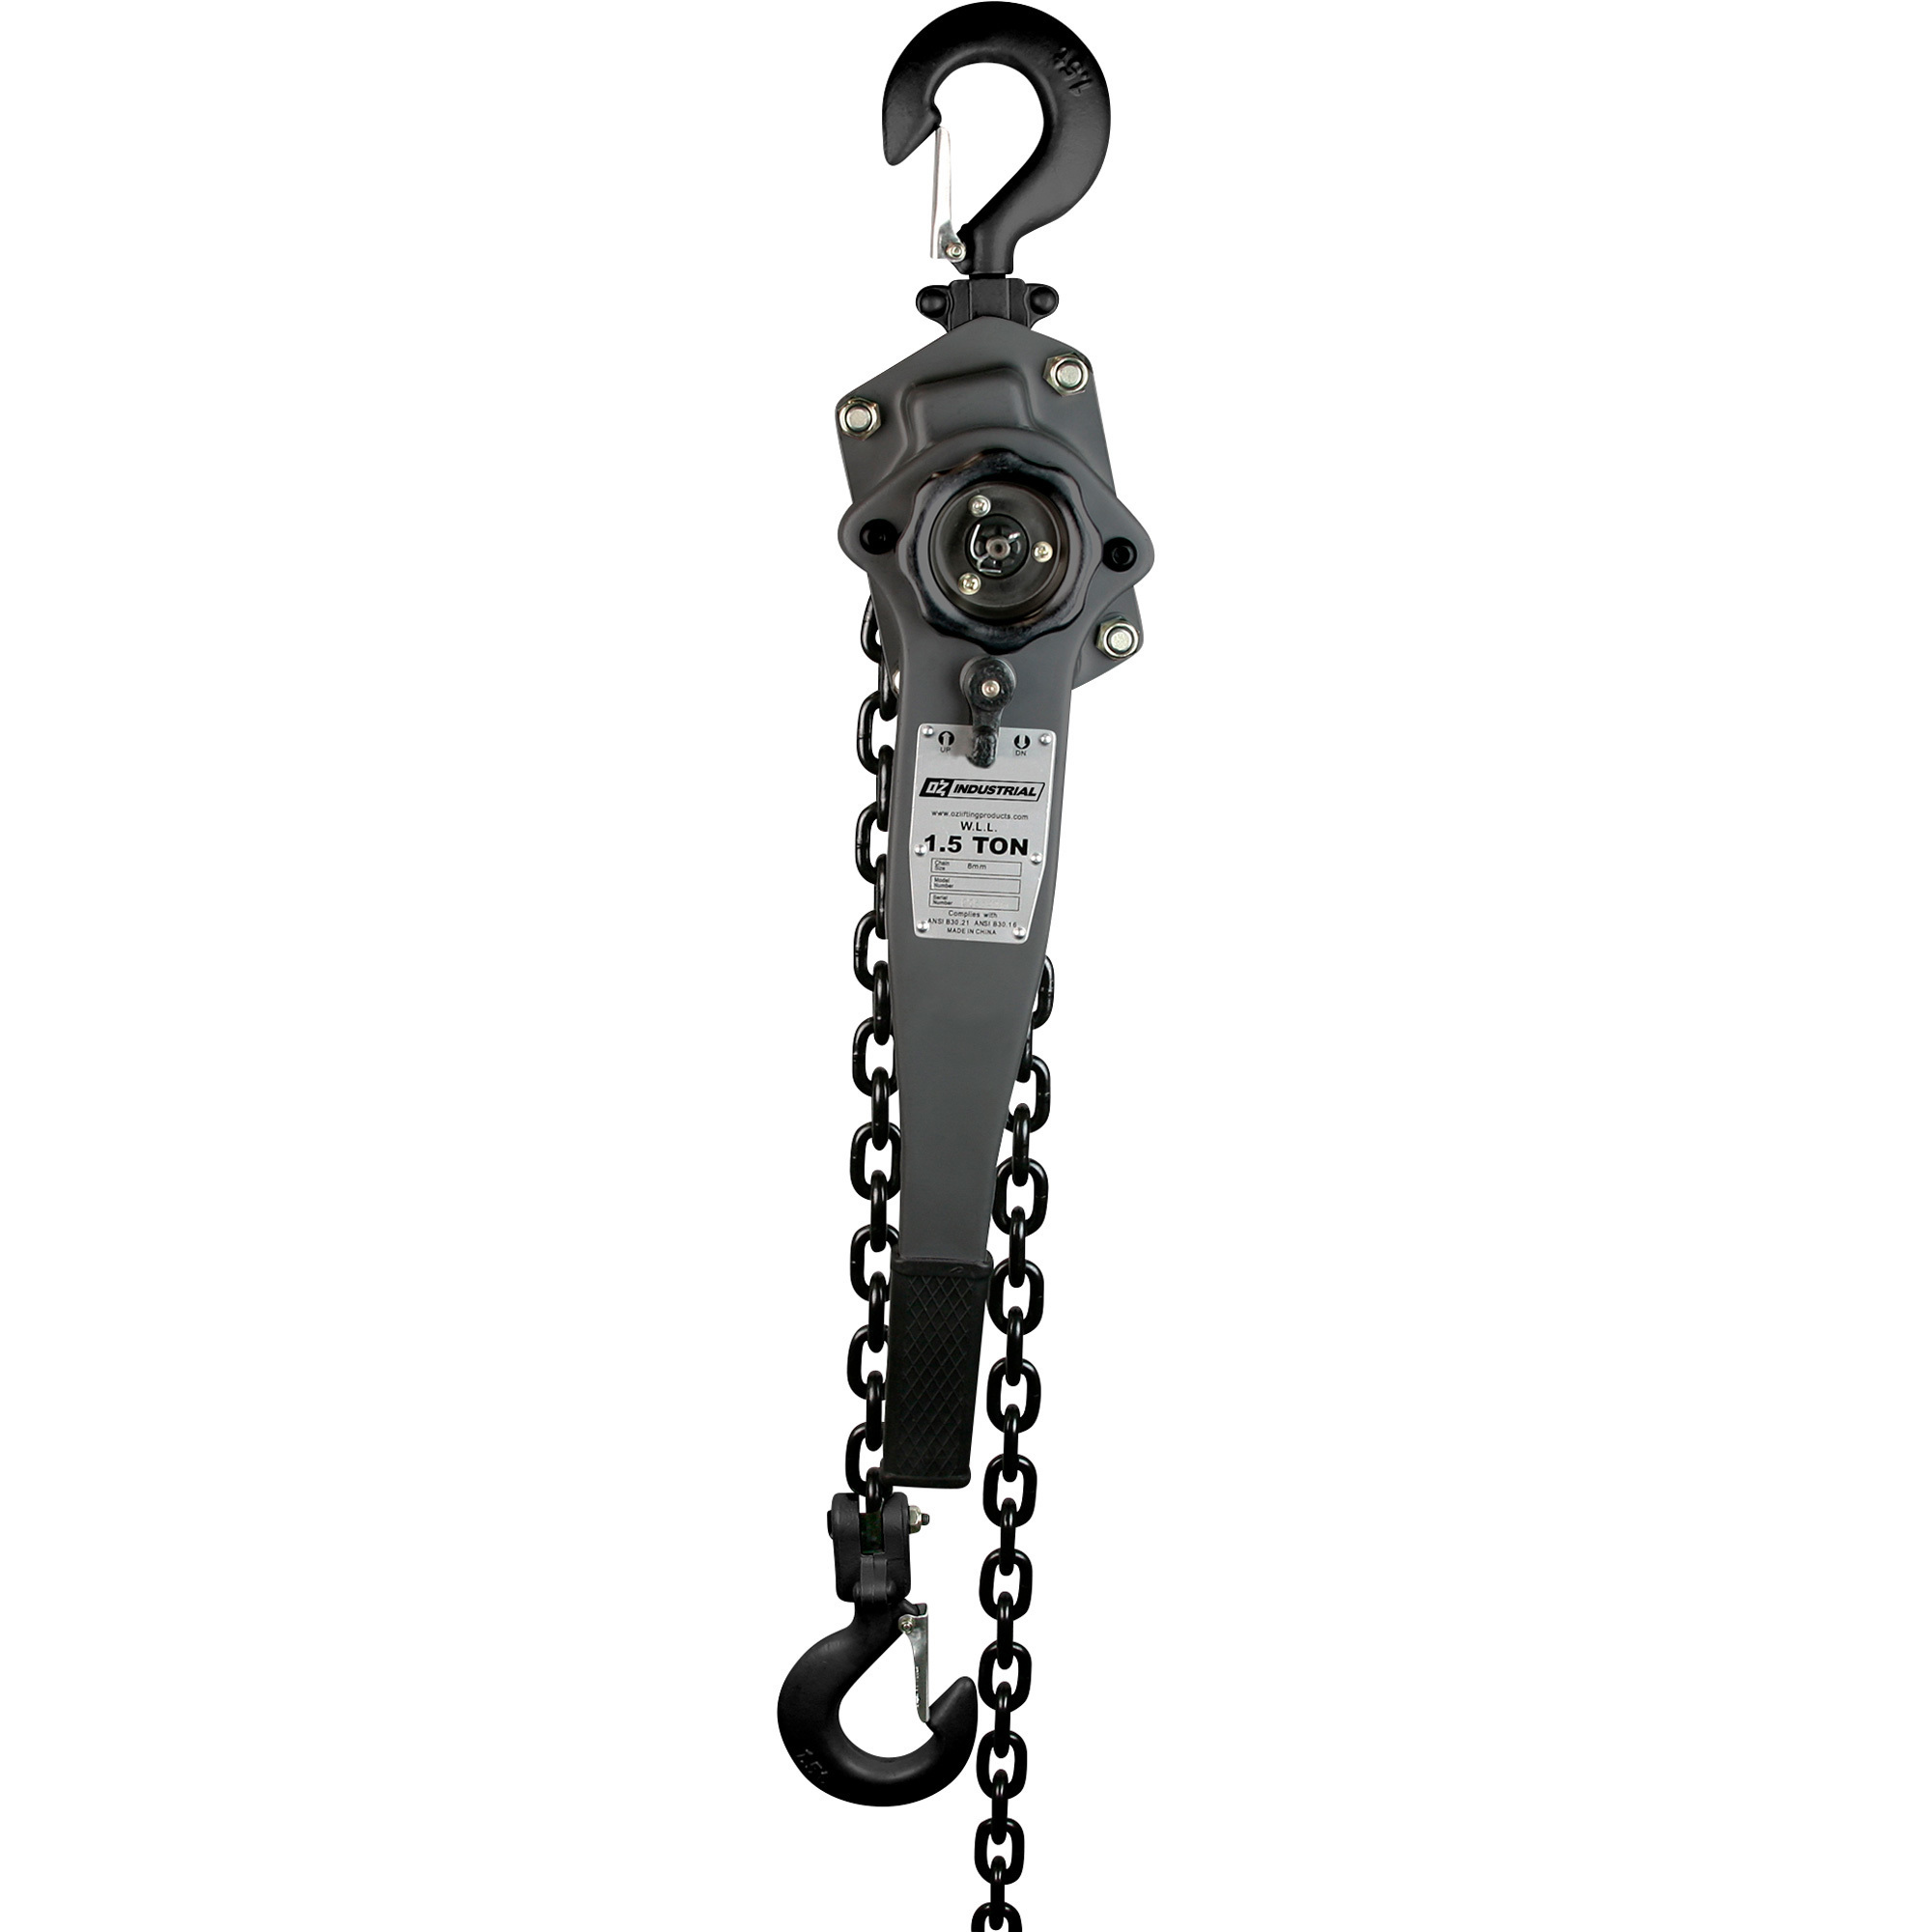 OZ Lifting Products Industrial Series Manual Lever Hoist â 1 1/2-Ton Capacity, 20ft. Lift, Model OZIND150-20LH